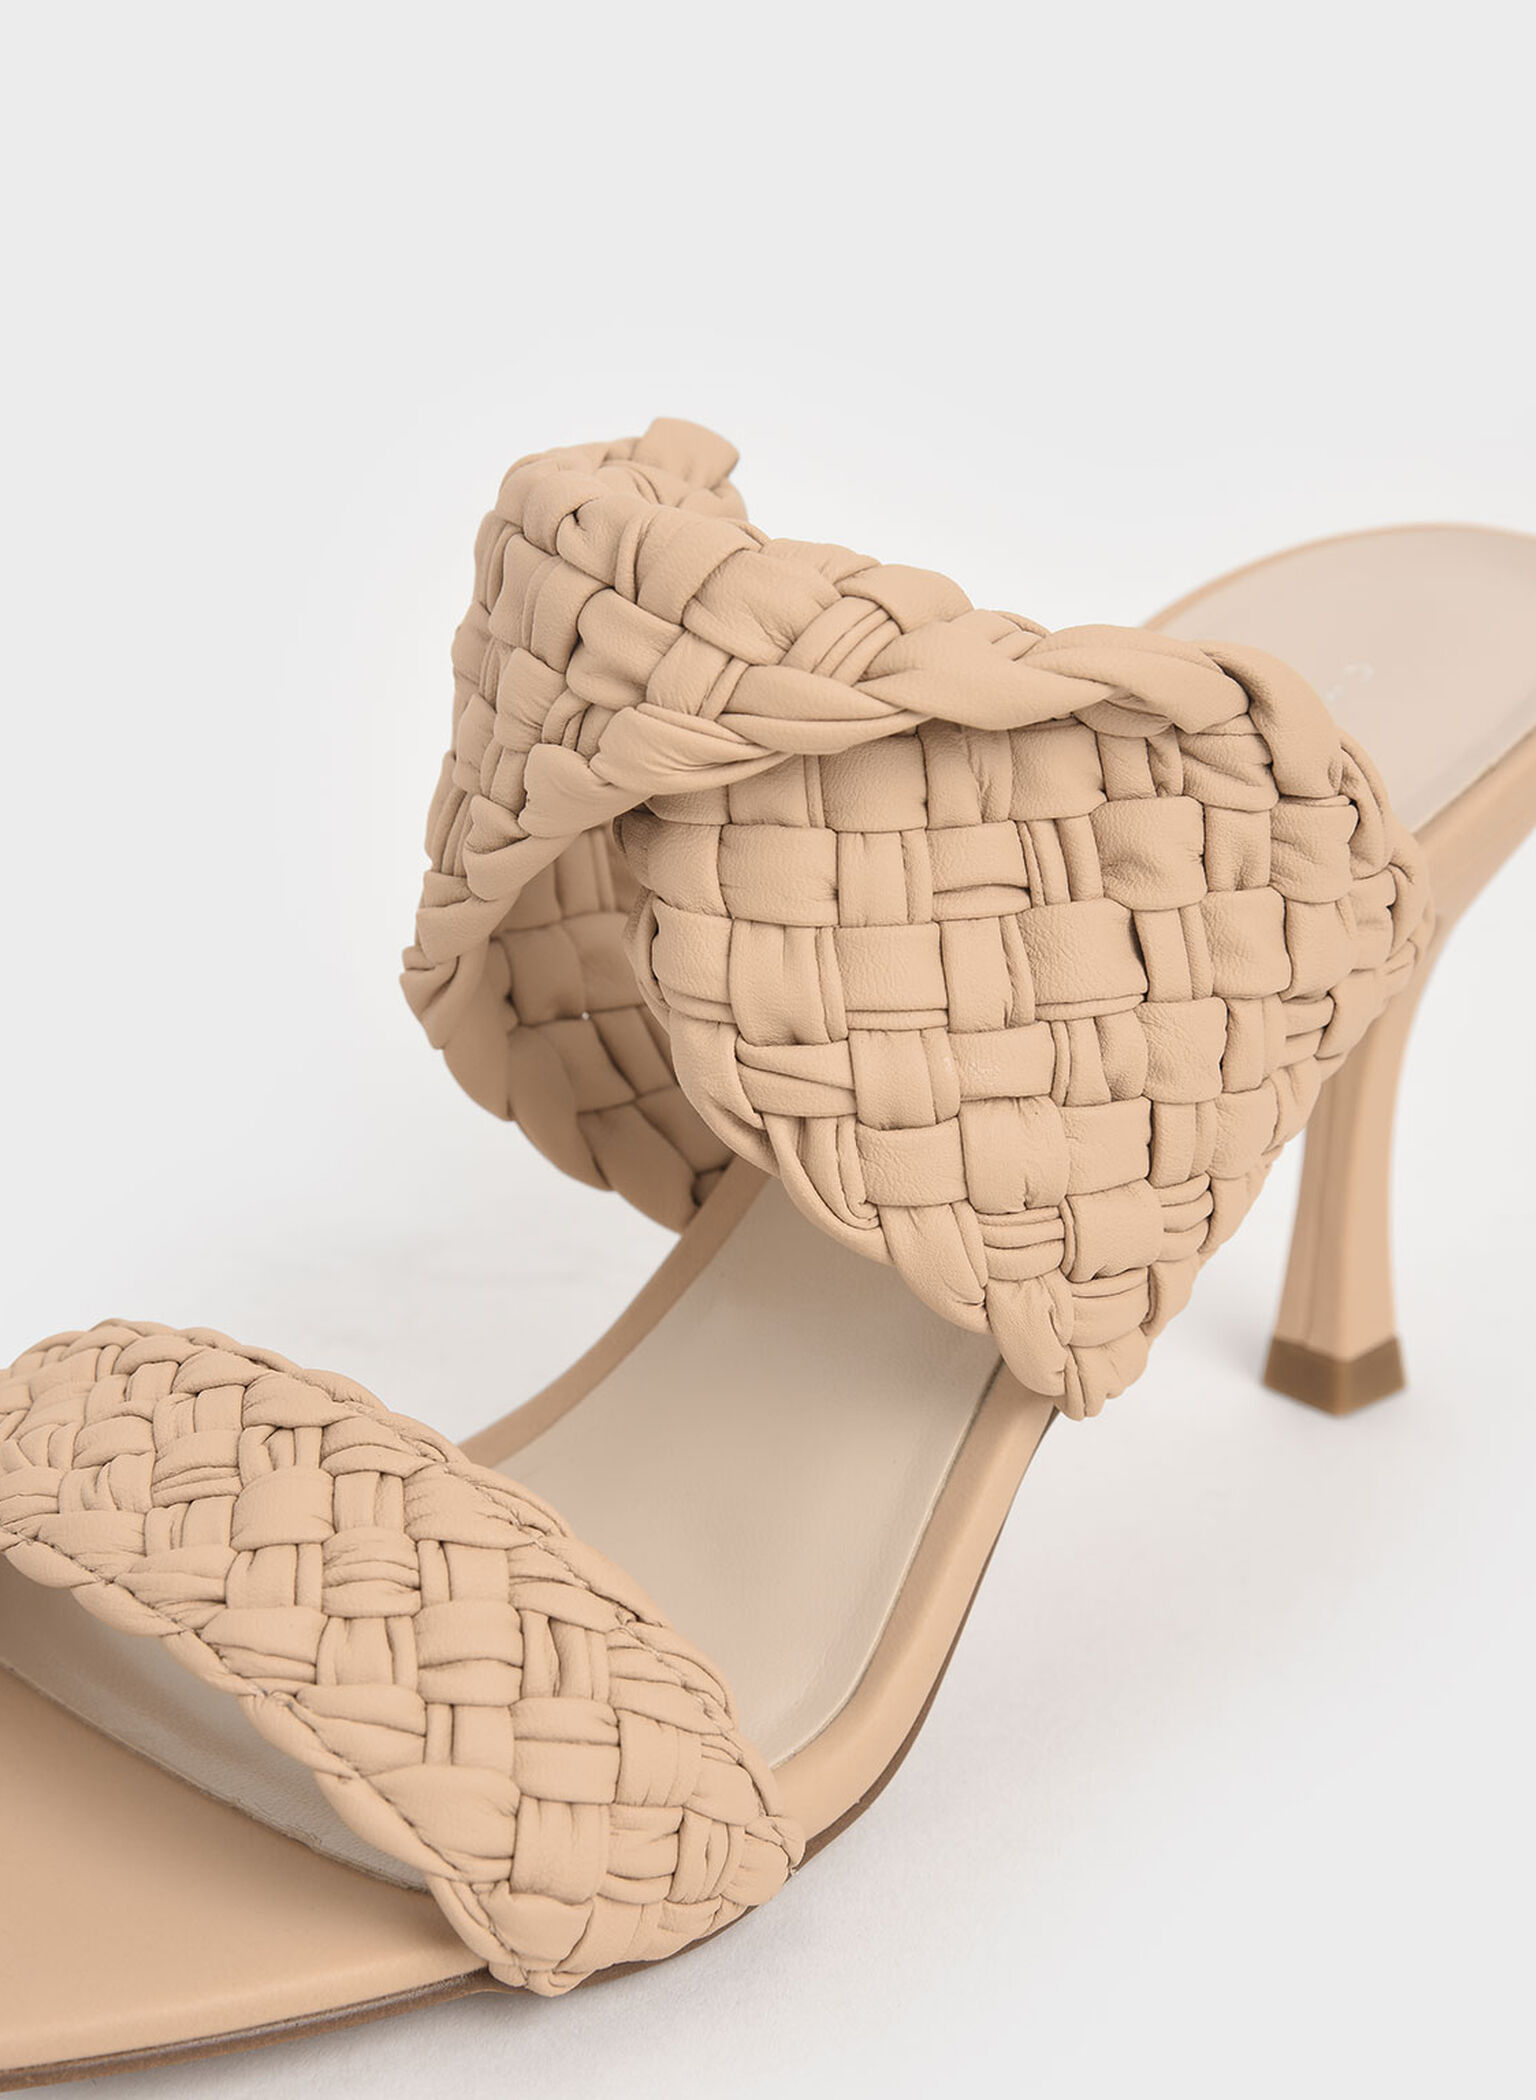 Double Strap Woven Heeled Mules, Nude, hi-res